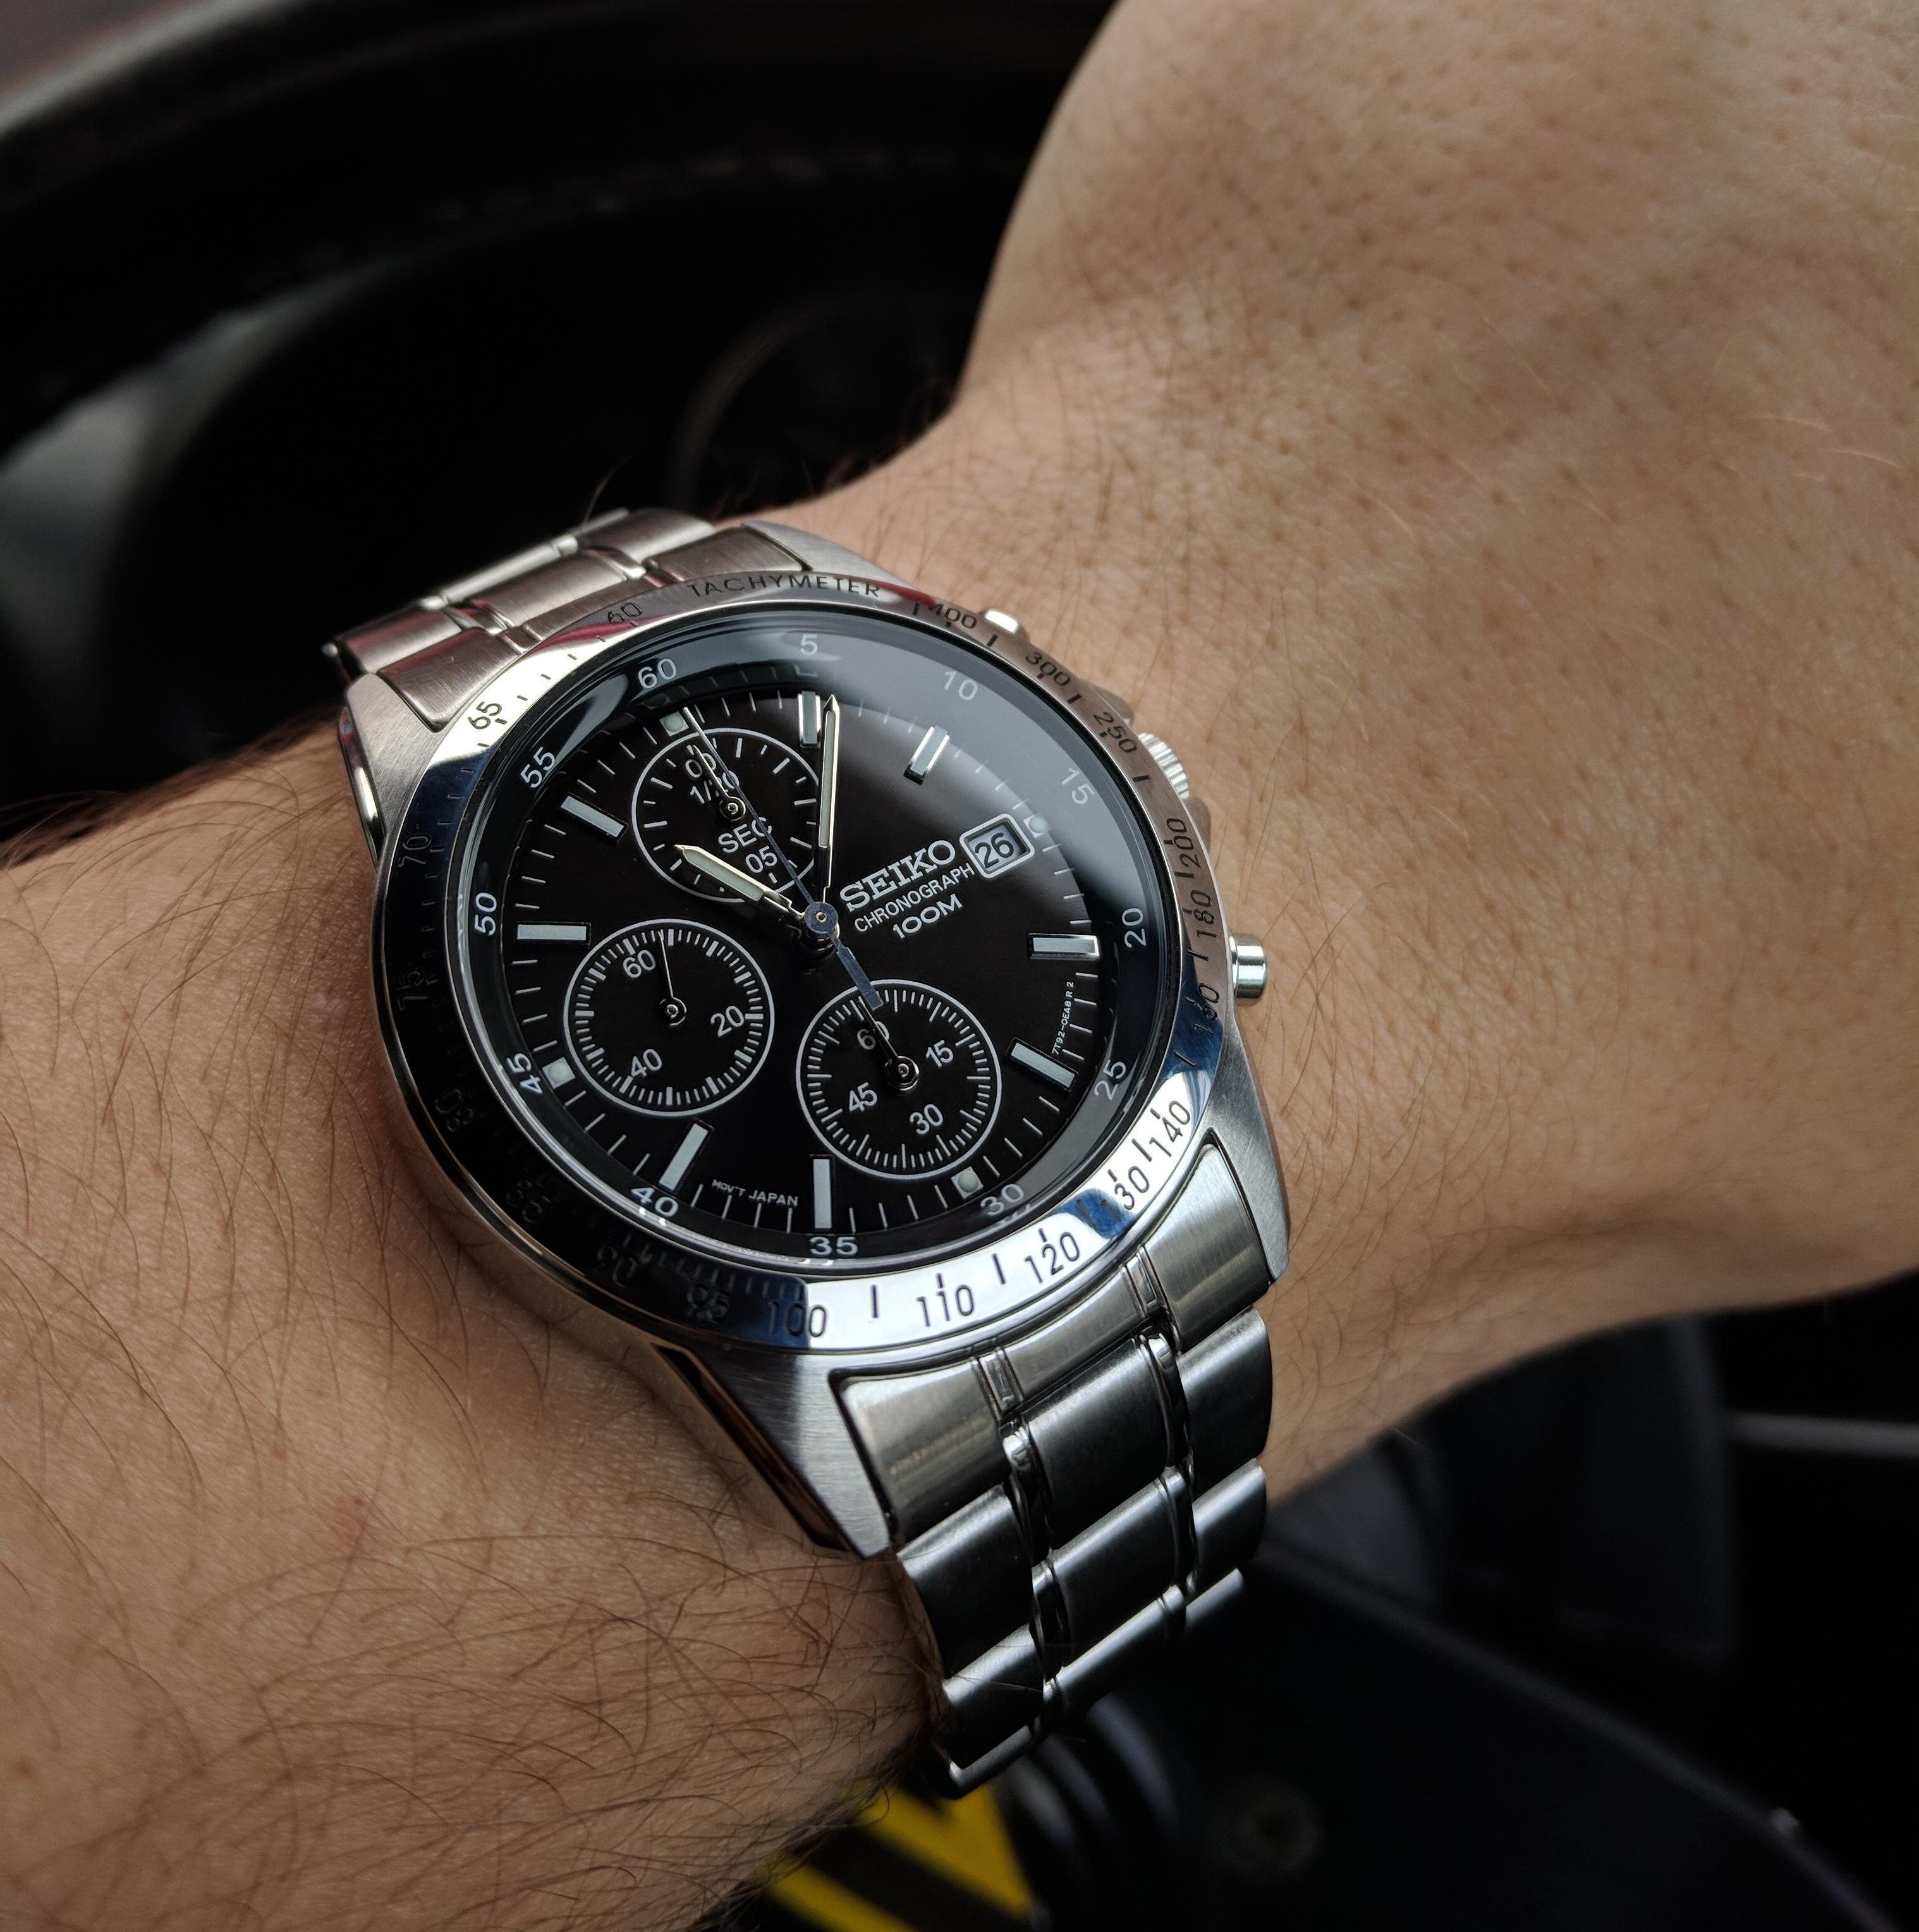 Seiko Chronograph SND367 Review & Complete Guide - Millenary Watches